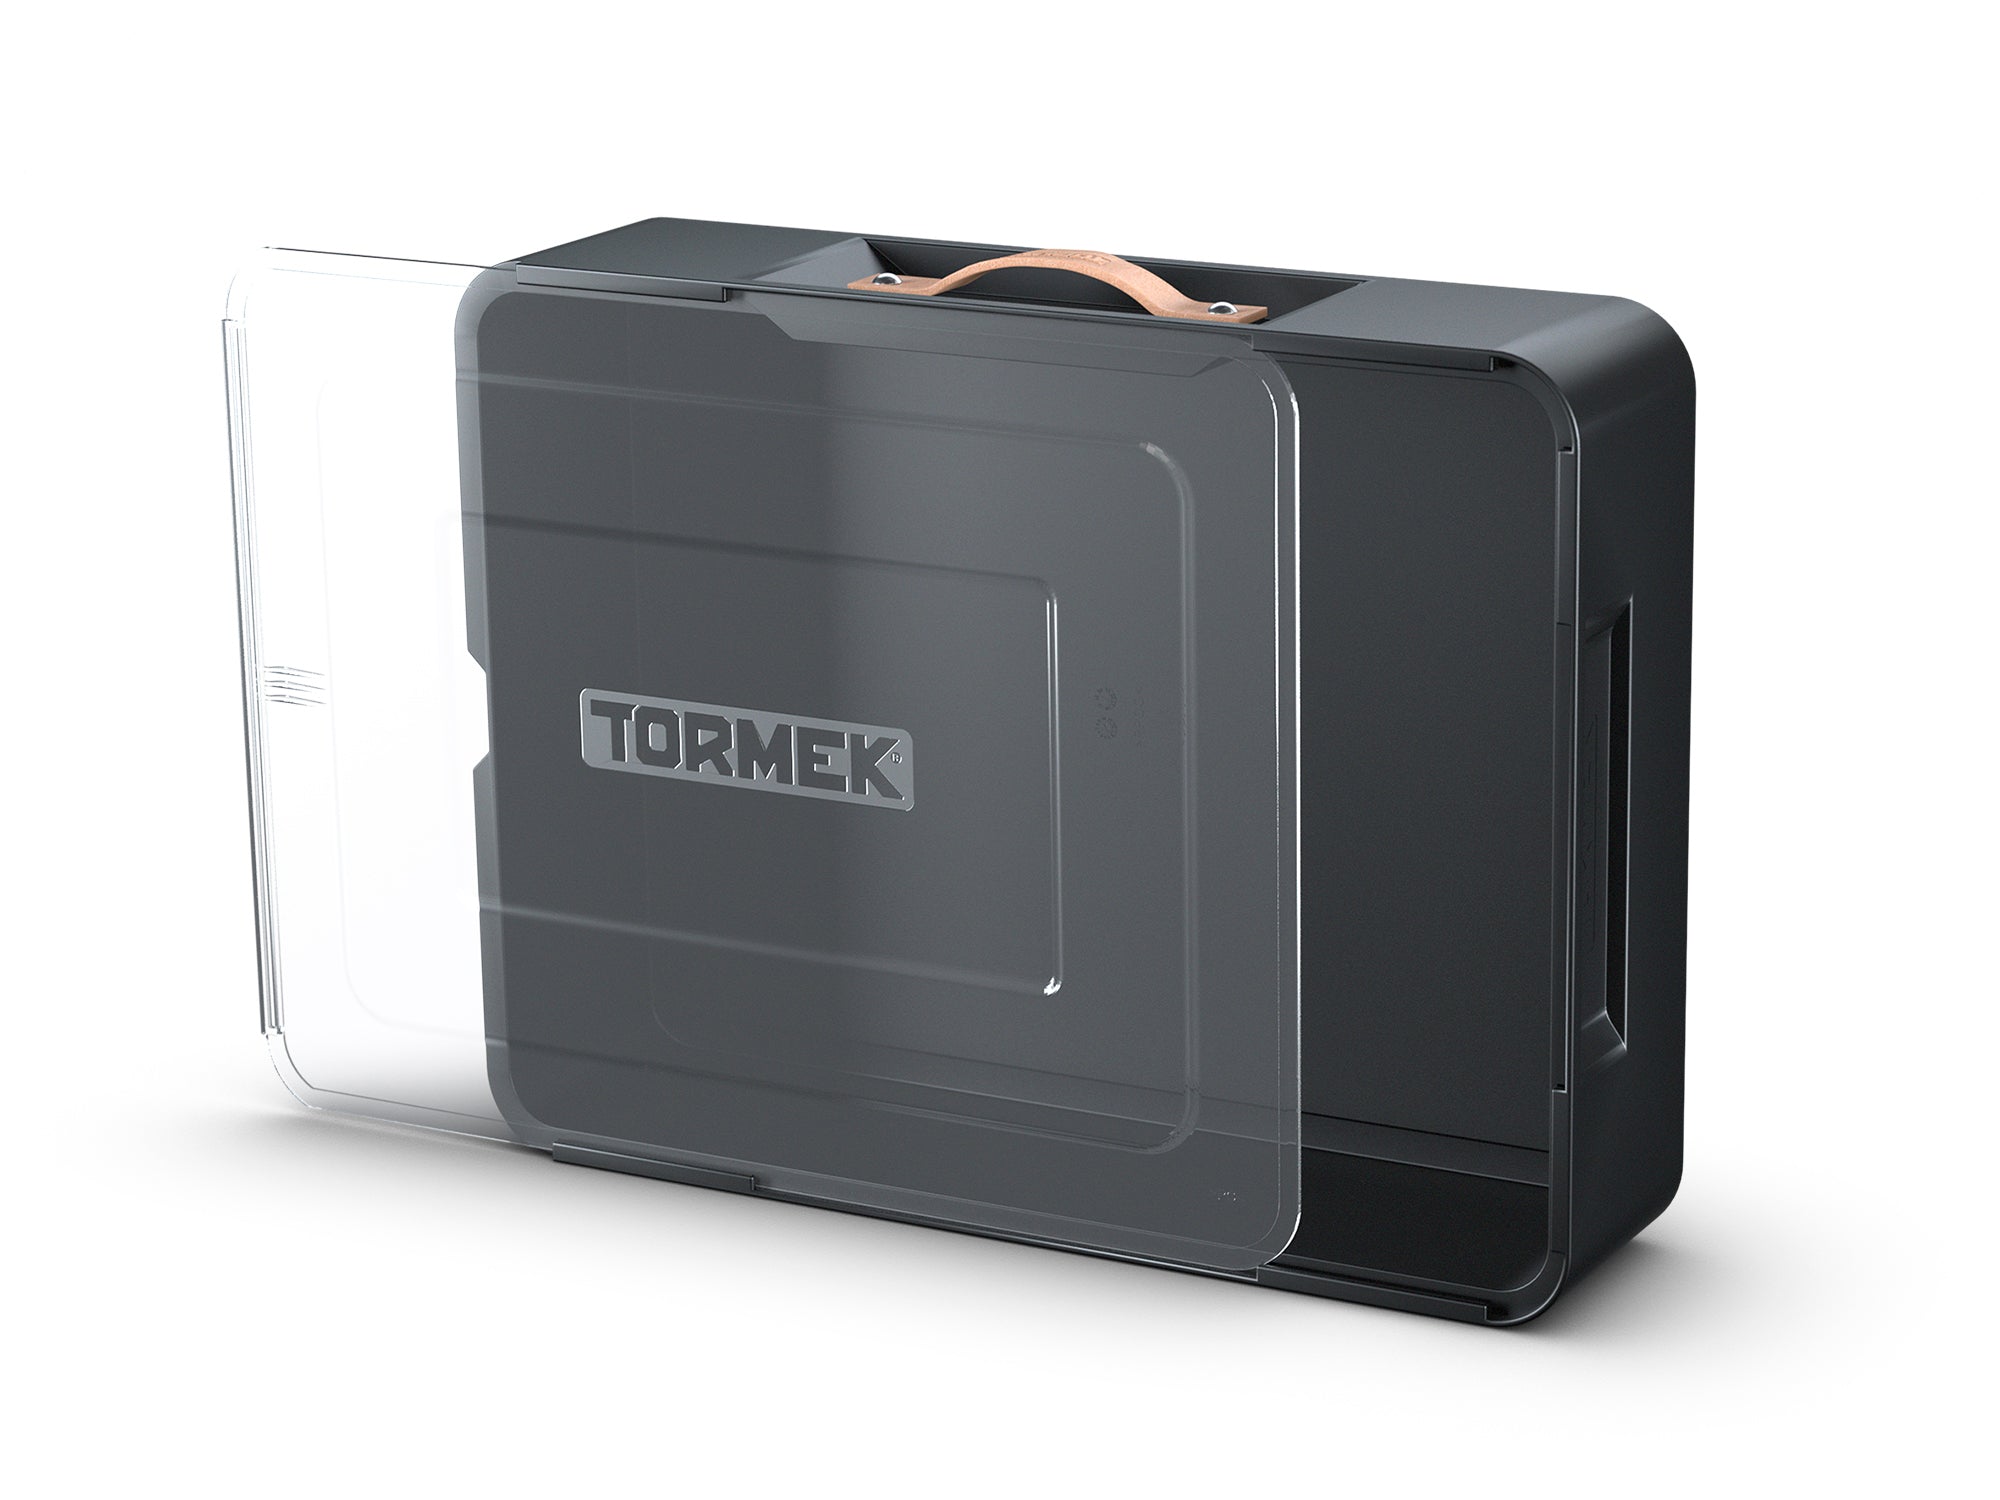 Storage Case For Jigs + Accessories TC-800 by Tormek